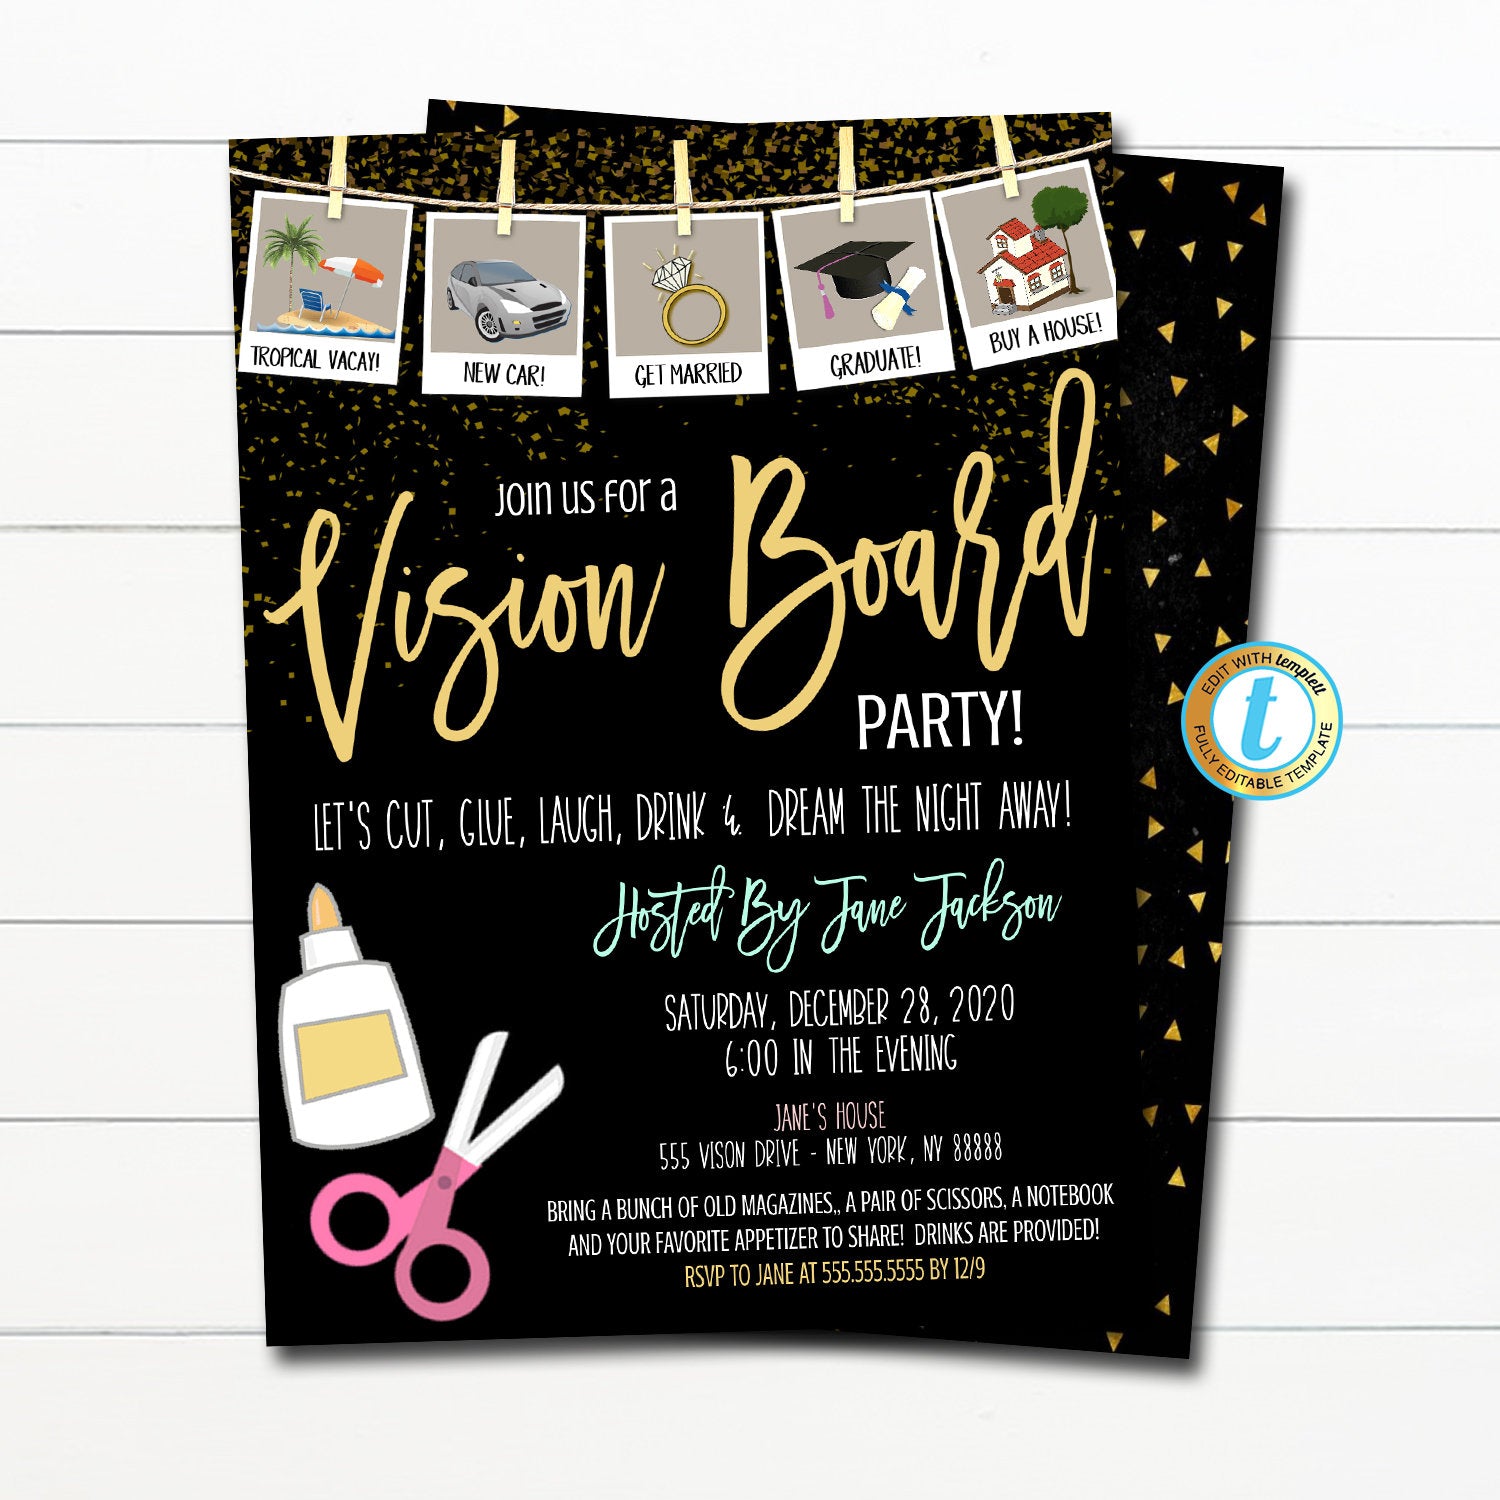 35-vision-board-party-invitation-template-party-invite-template-vision-board-party